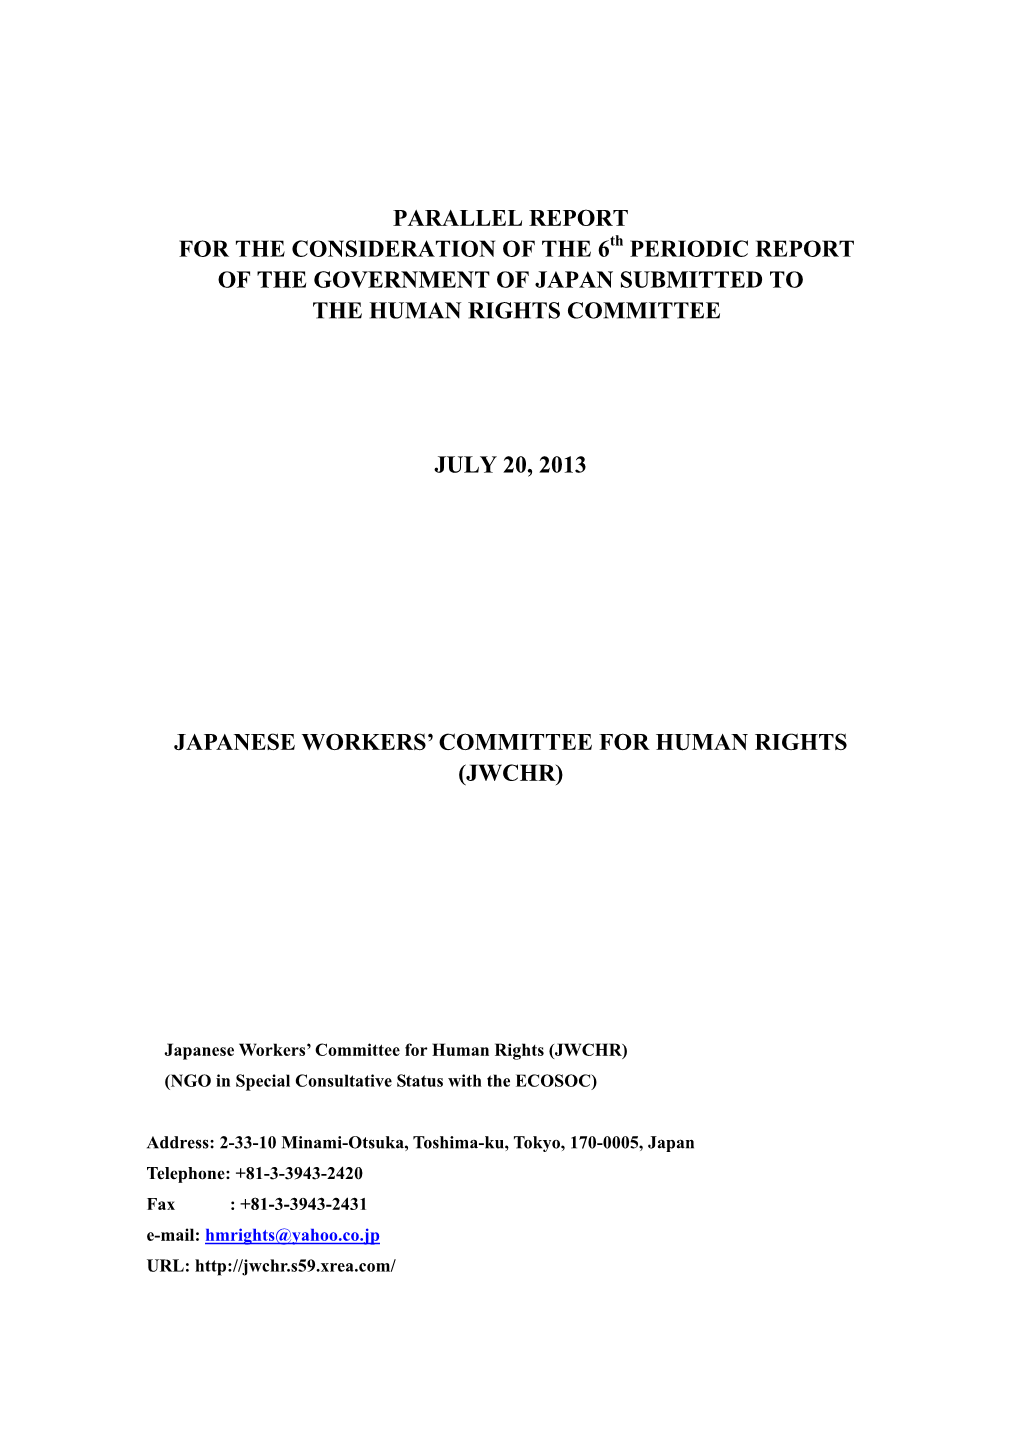 NGO Report to UN Human Rights Committee